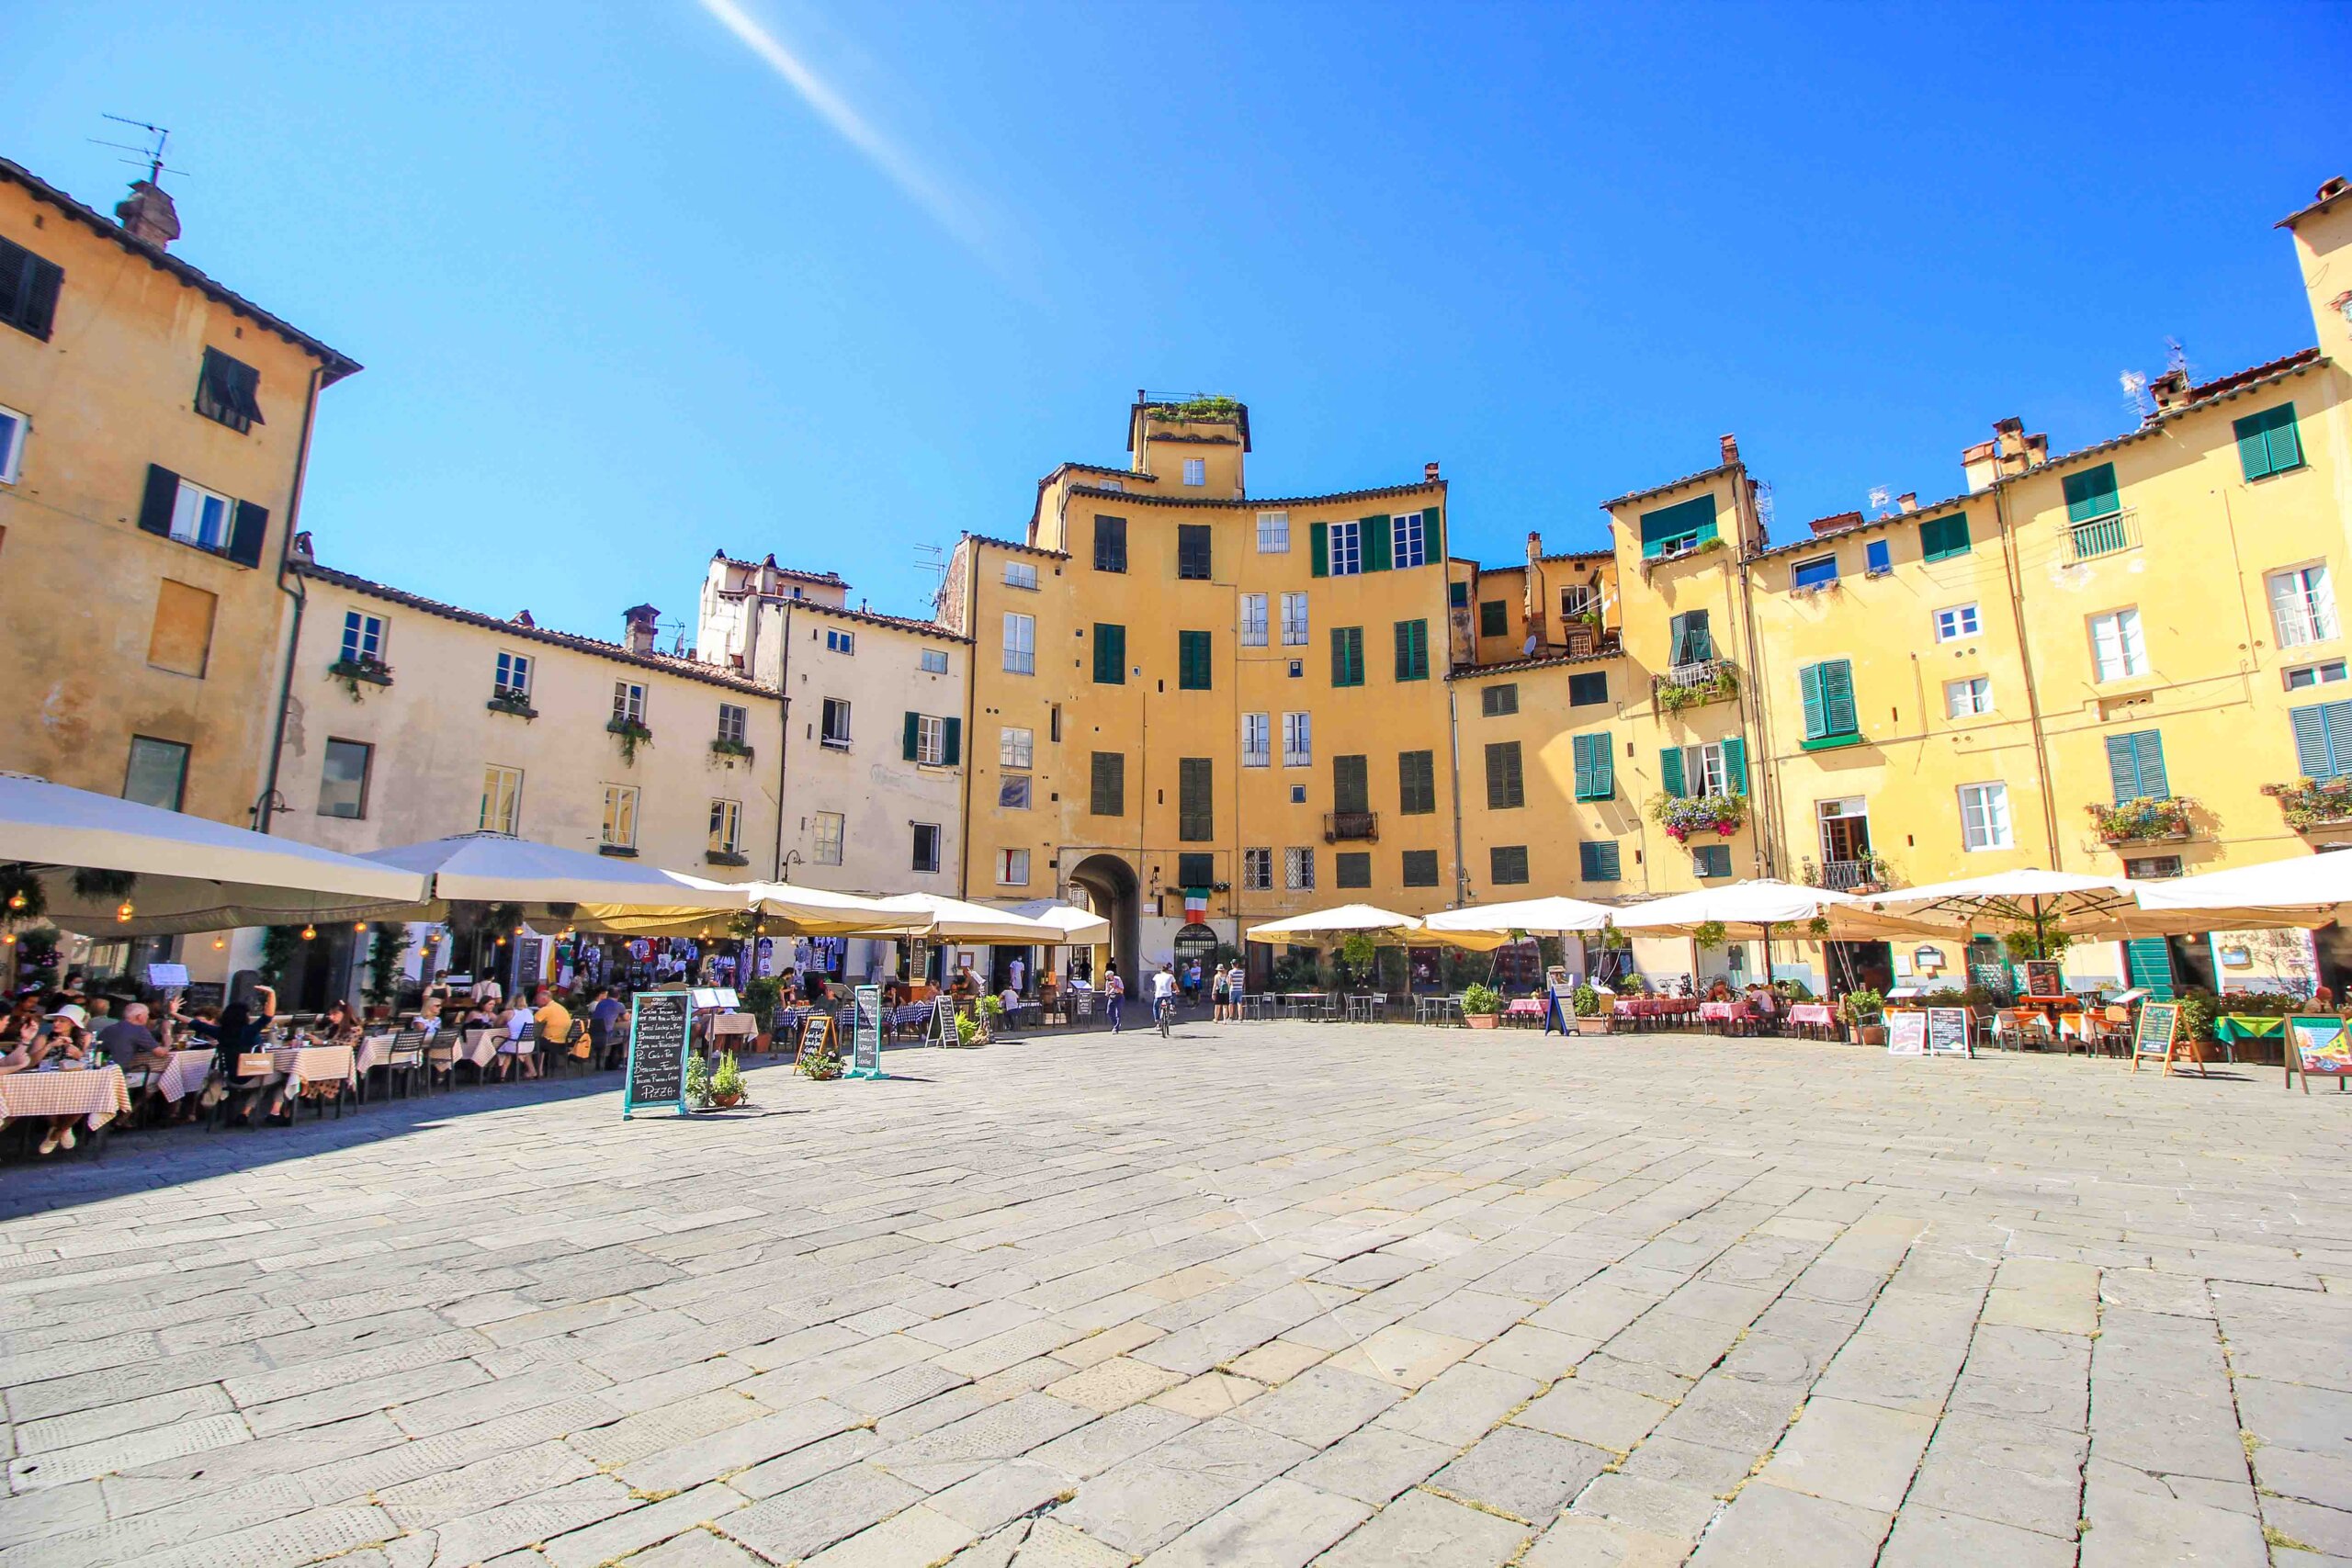 Top 15 Amazing Things to Do in Lucca (Italy) - PlacesofJuma